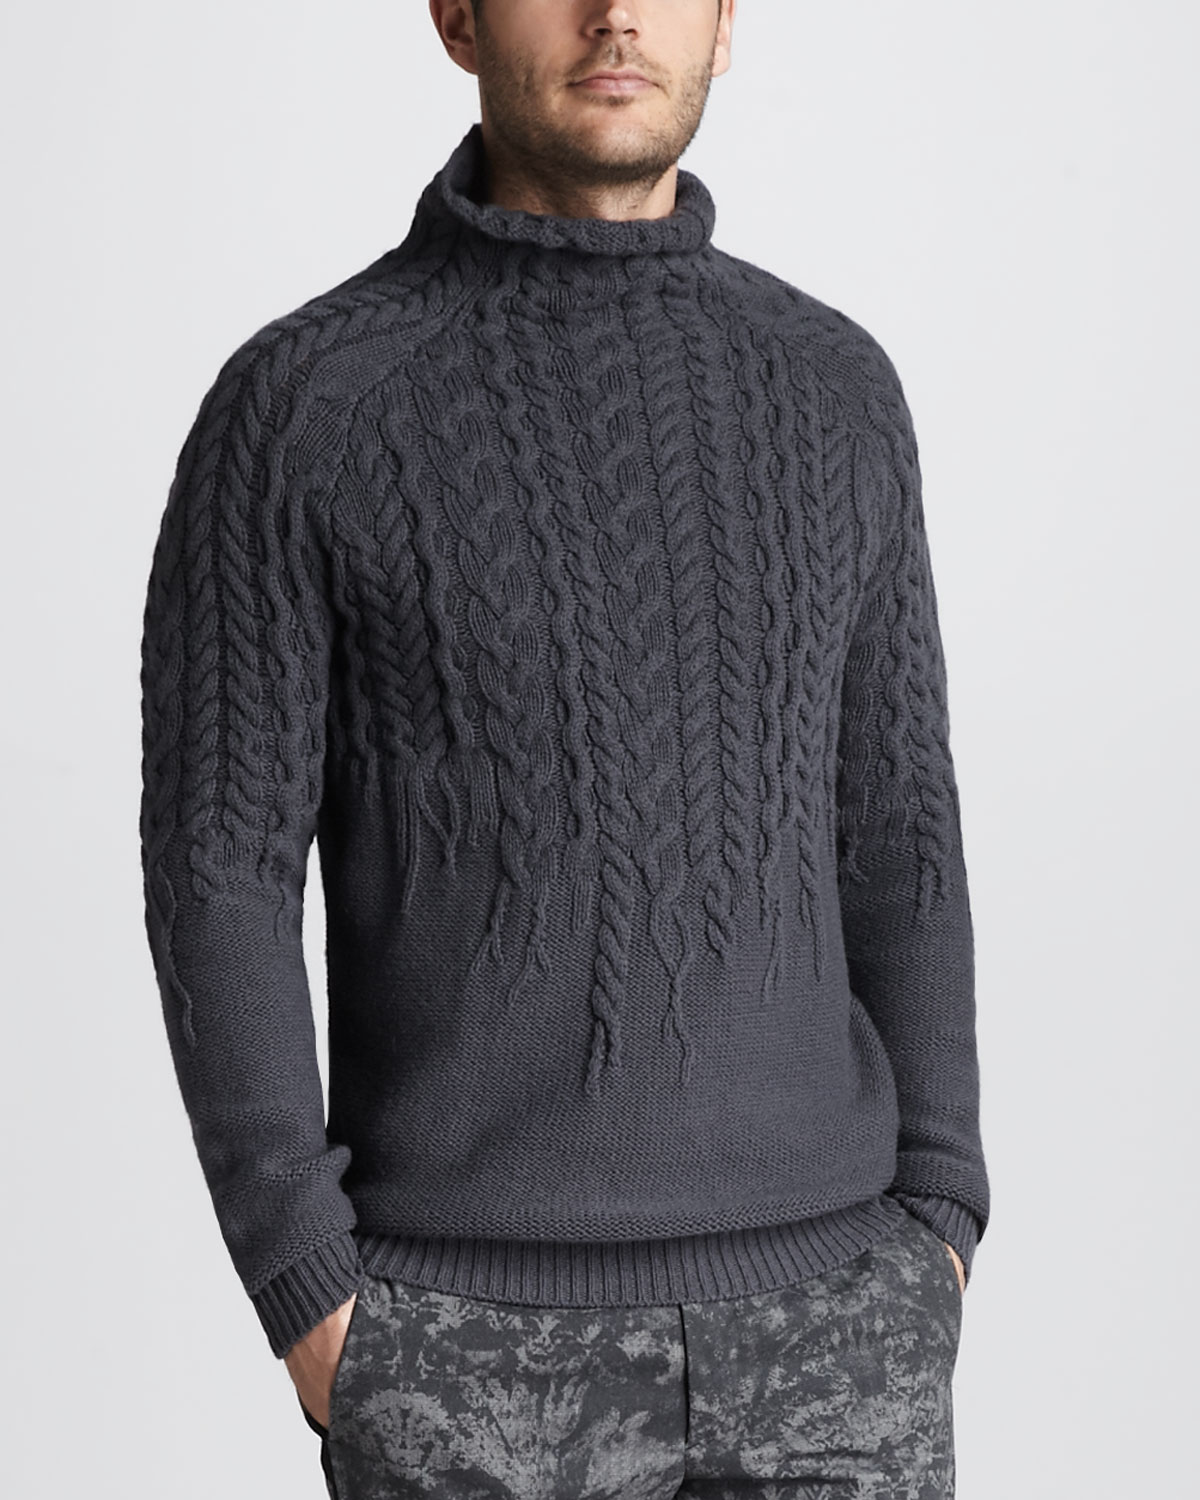 Just Cavalli Mockneck Cable Sweater in Gray for Men - Lyst